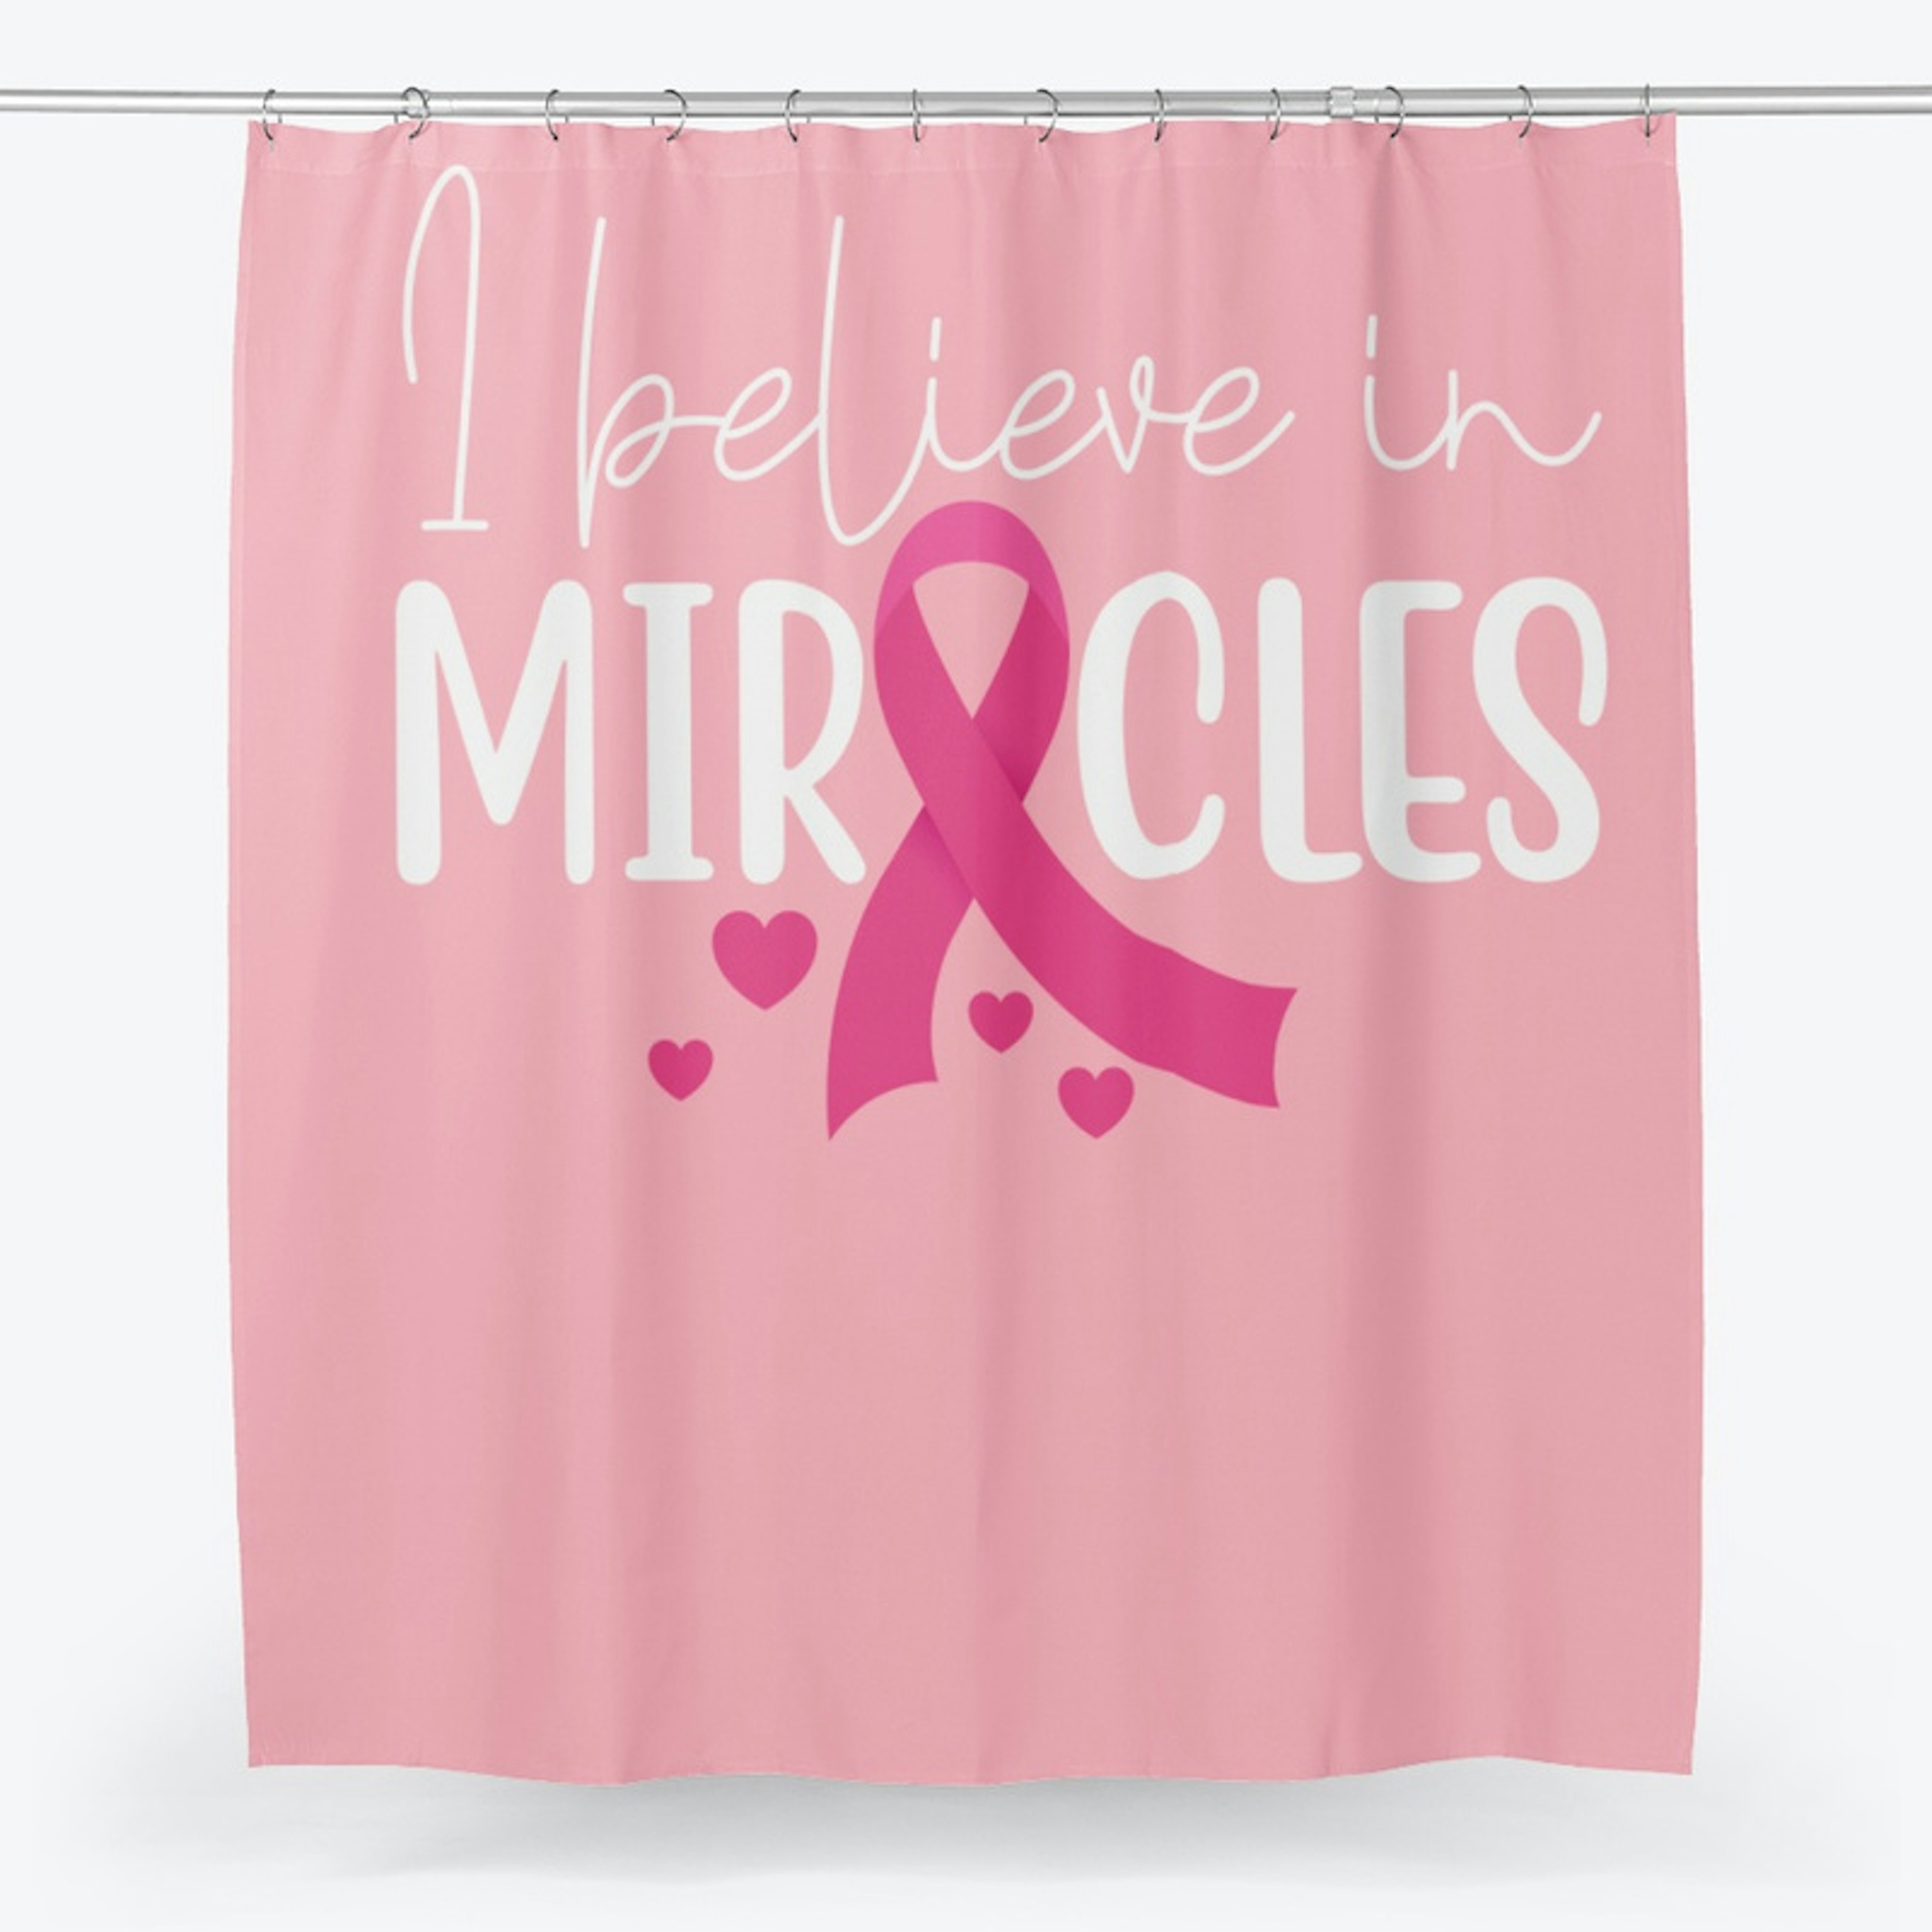 I Believe in Miracles Tees and More